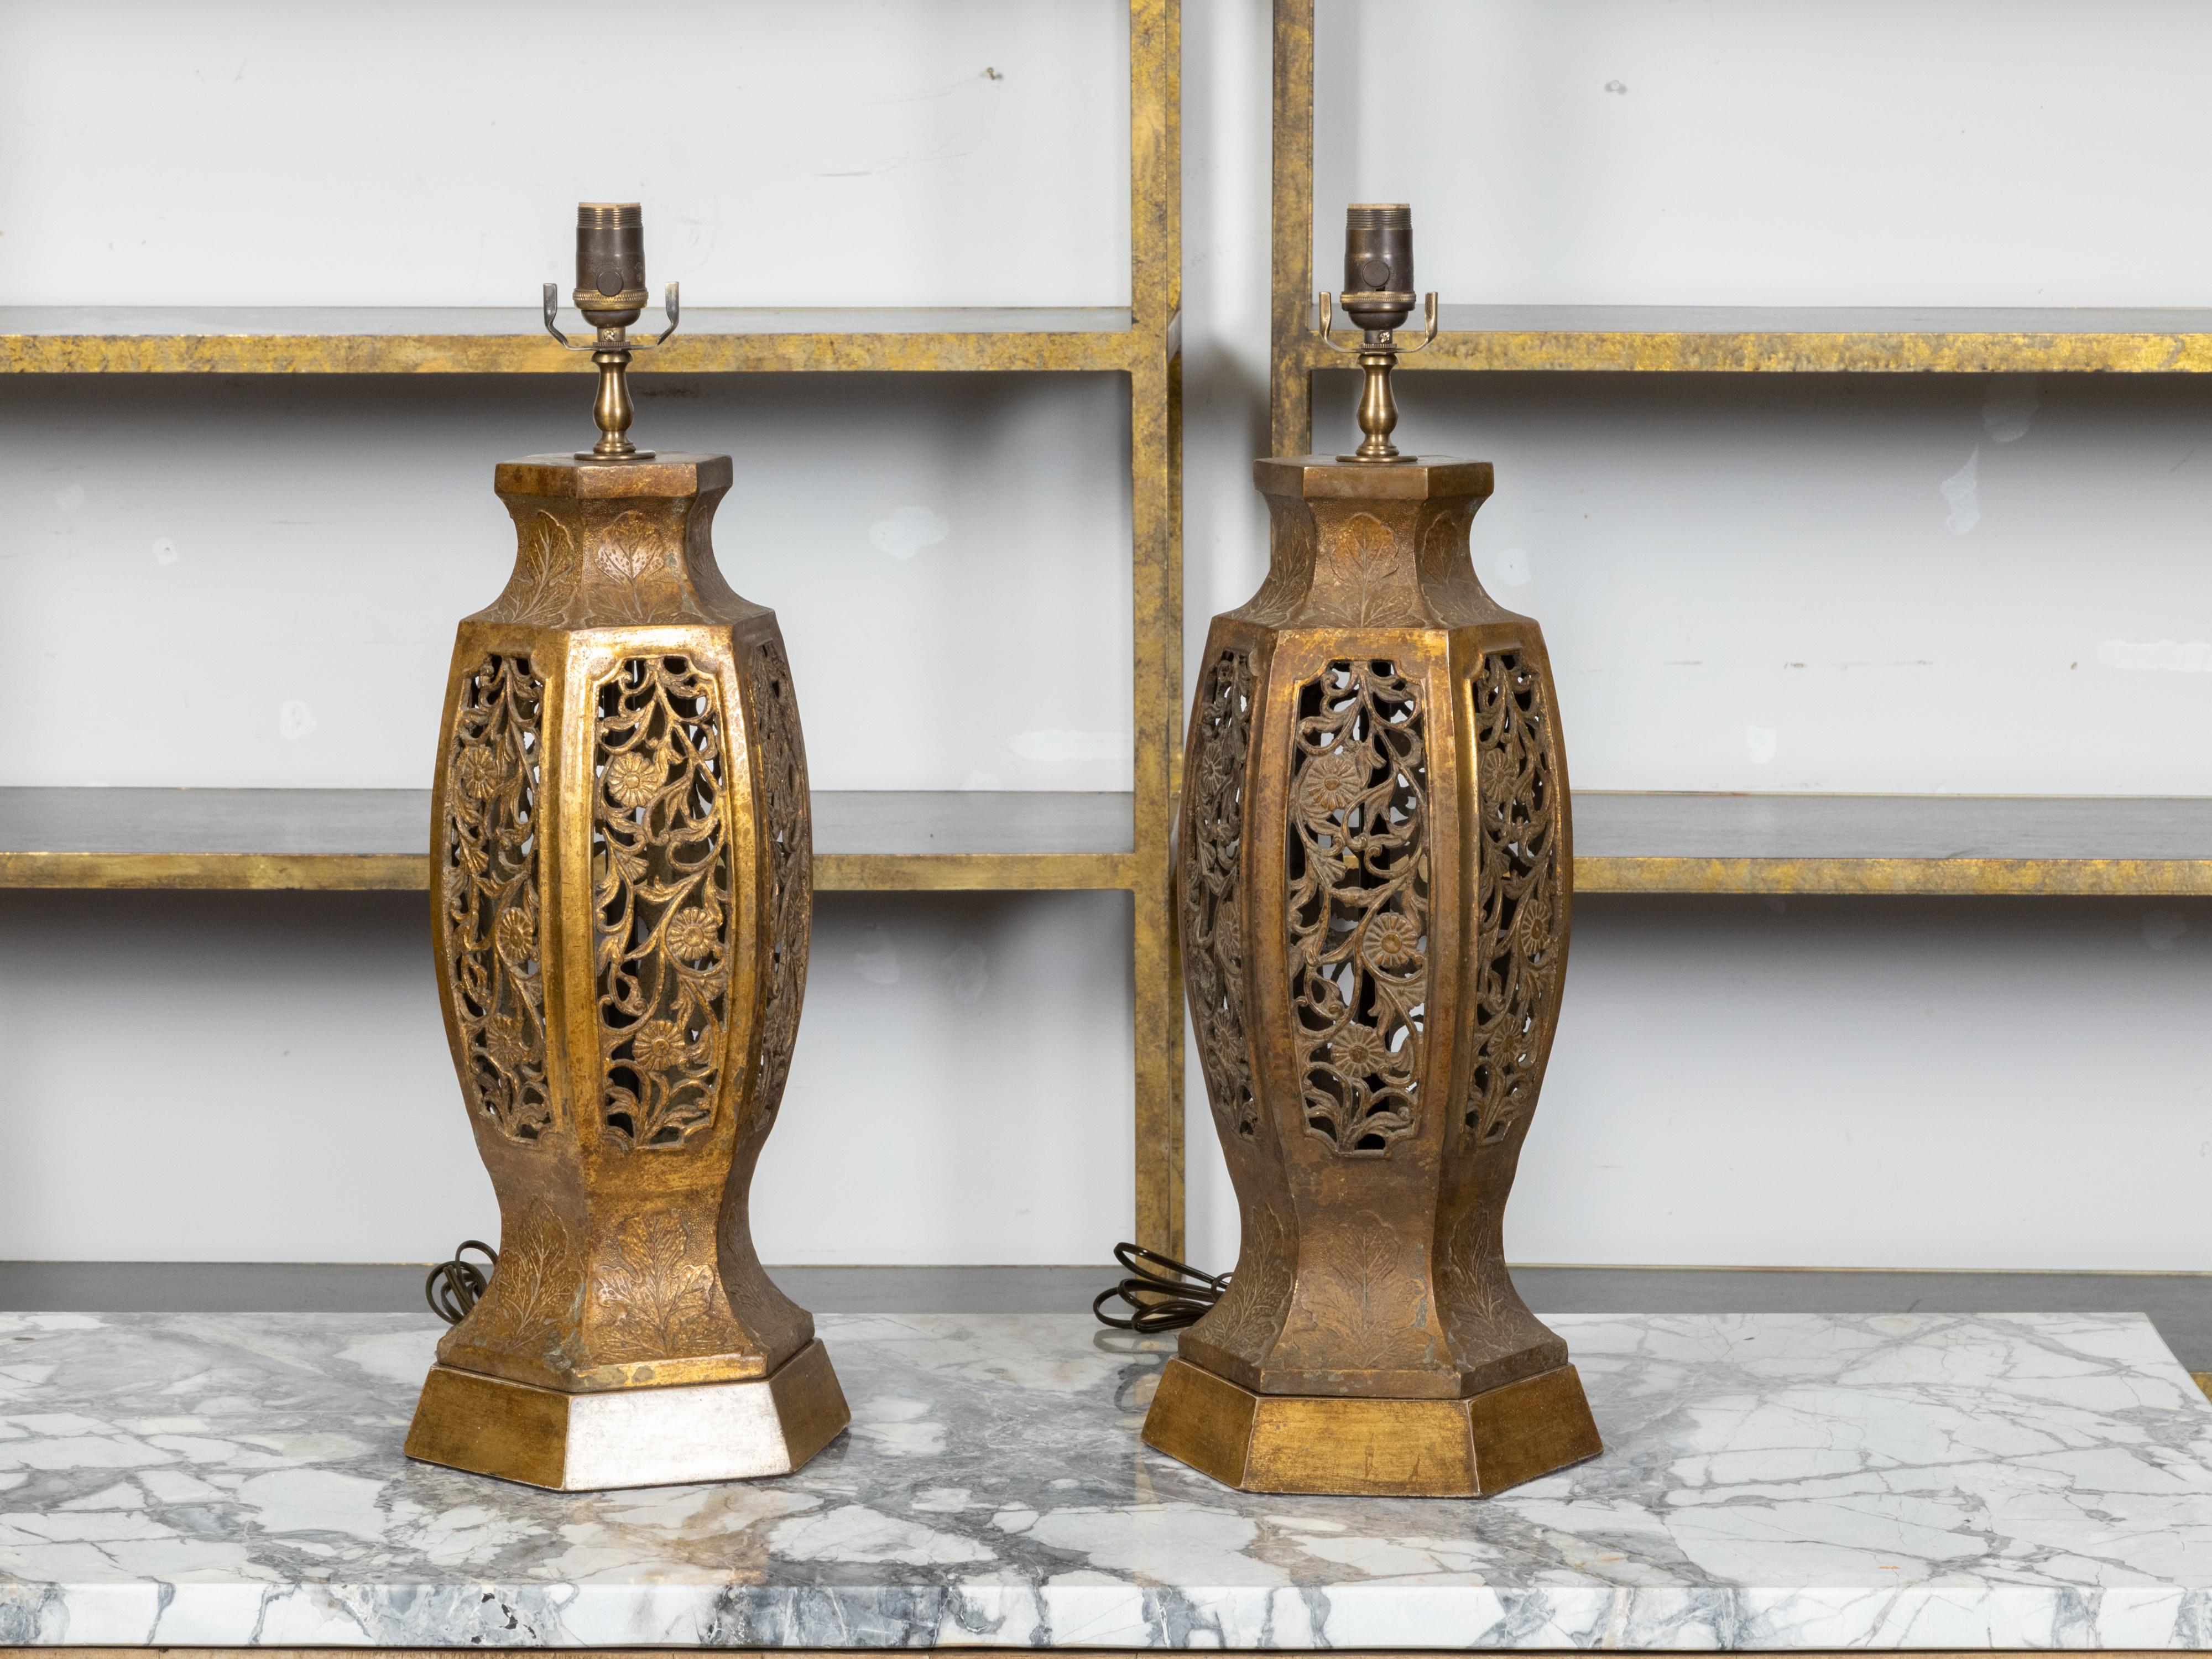 A pair of vintage Asian carved table lamps from the mid 20th century with pierced openwork foliage and floral motifs, resting on hexagonal bases. Created in Asia during the Midcentury period, each of this pair of table lamps attracts our attention